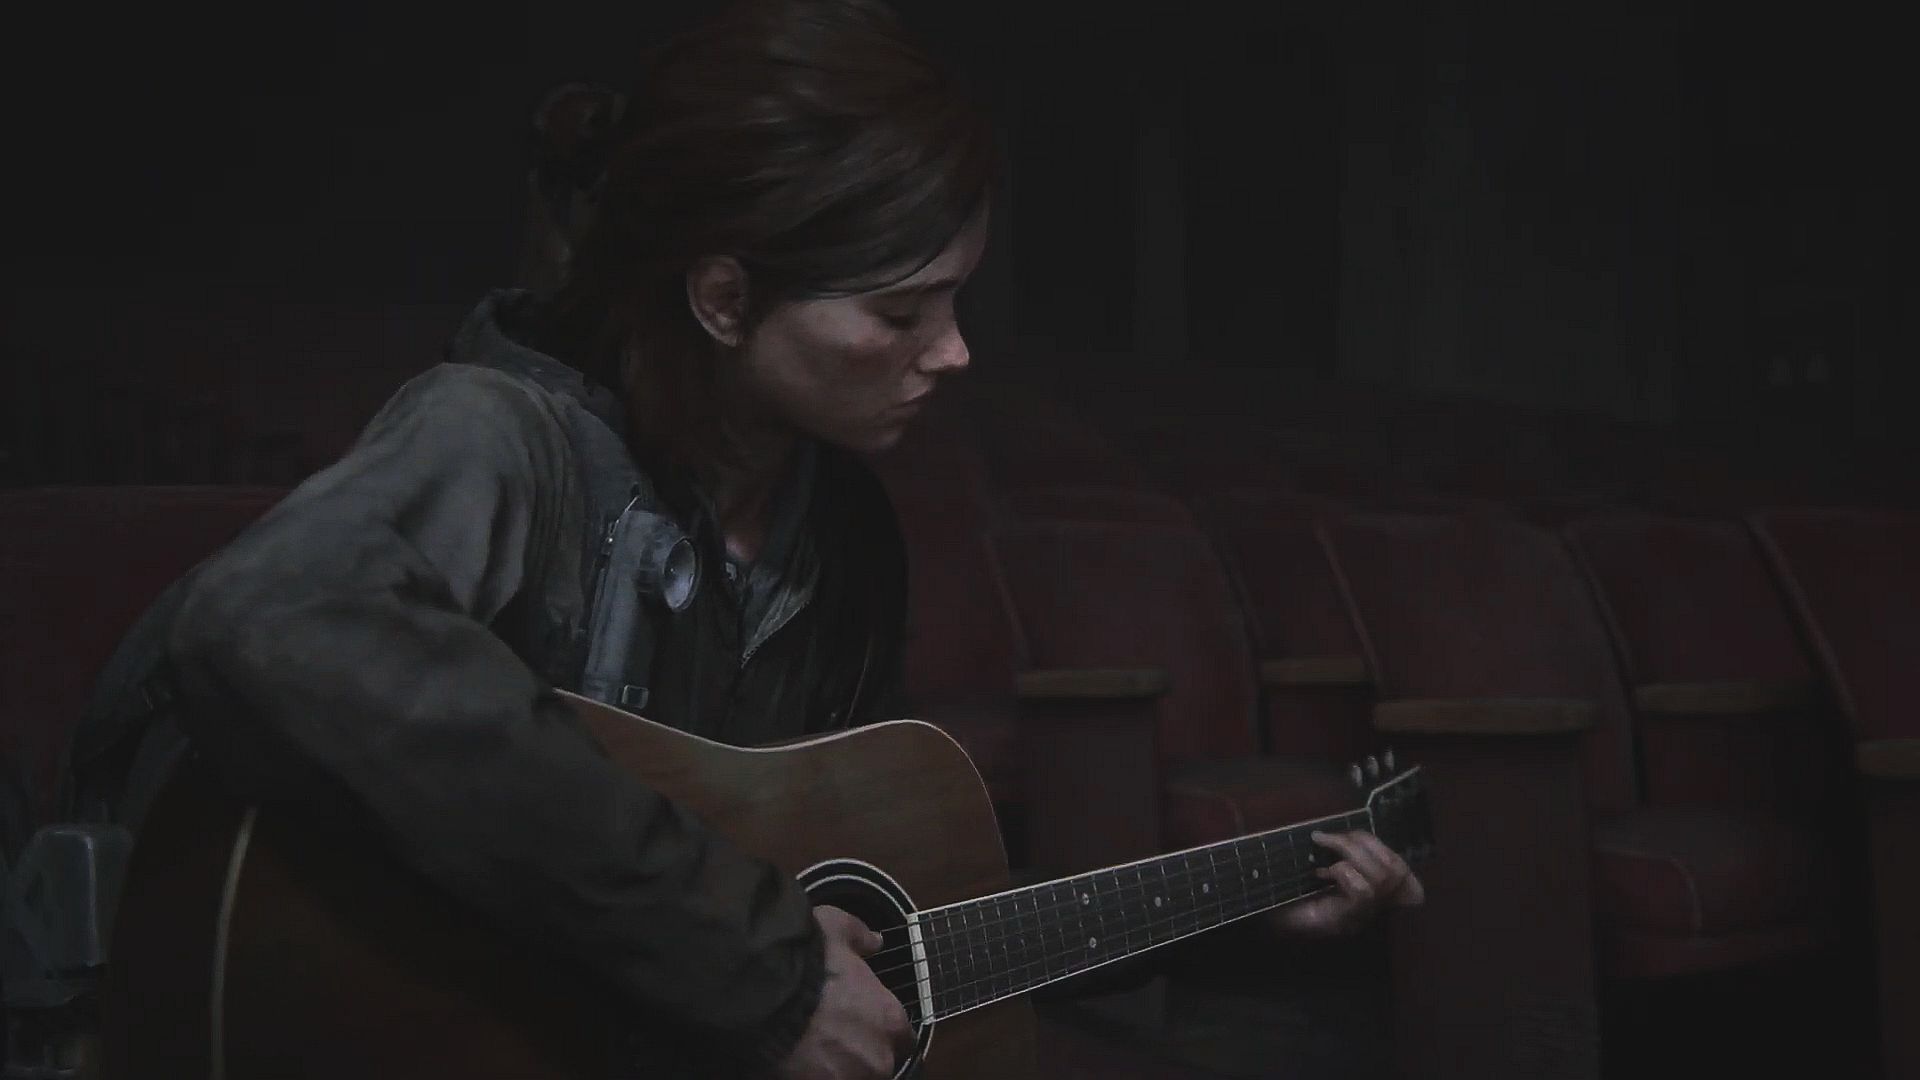 Image for Naughty Dog shares The Last of Us multiplayer teaser image, thinks there's "more story to tell" in the future